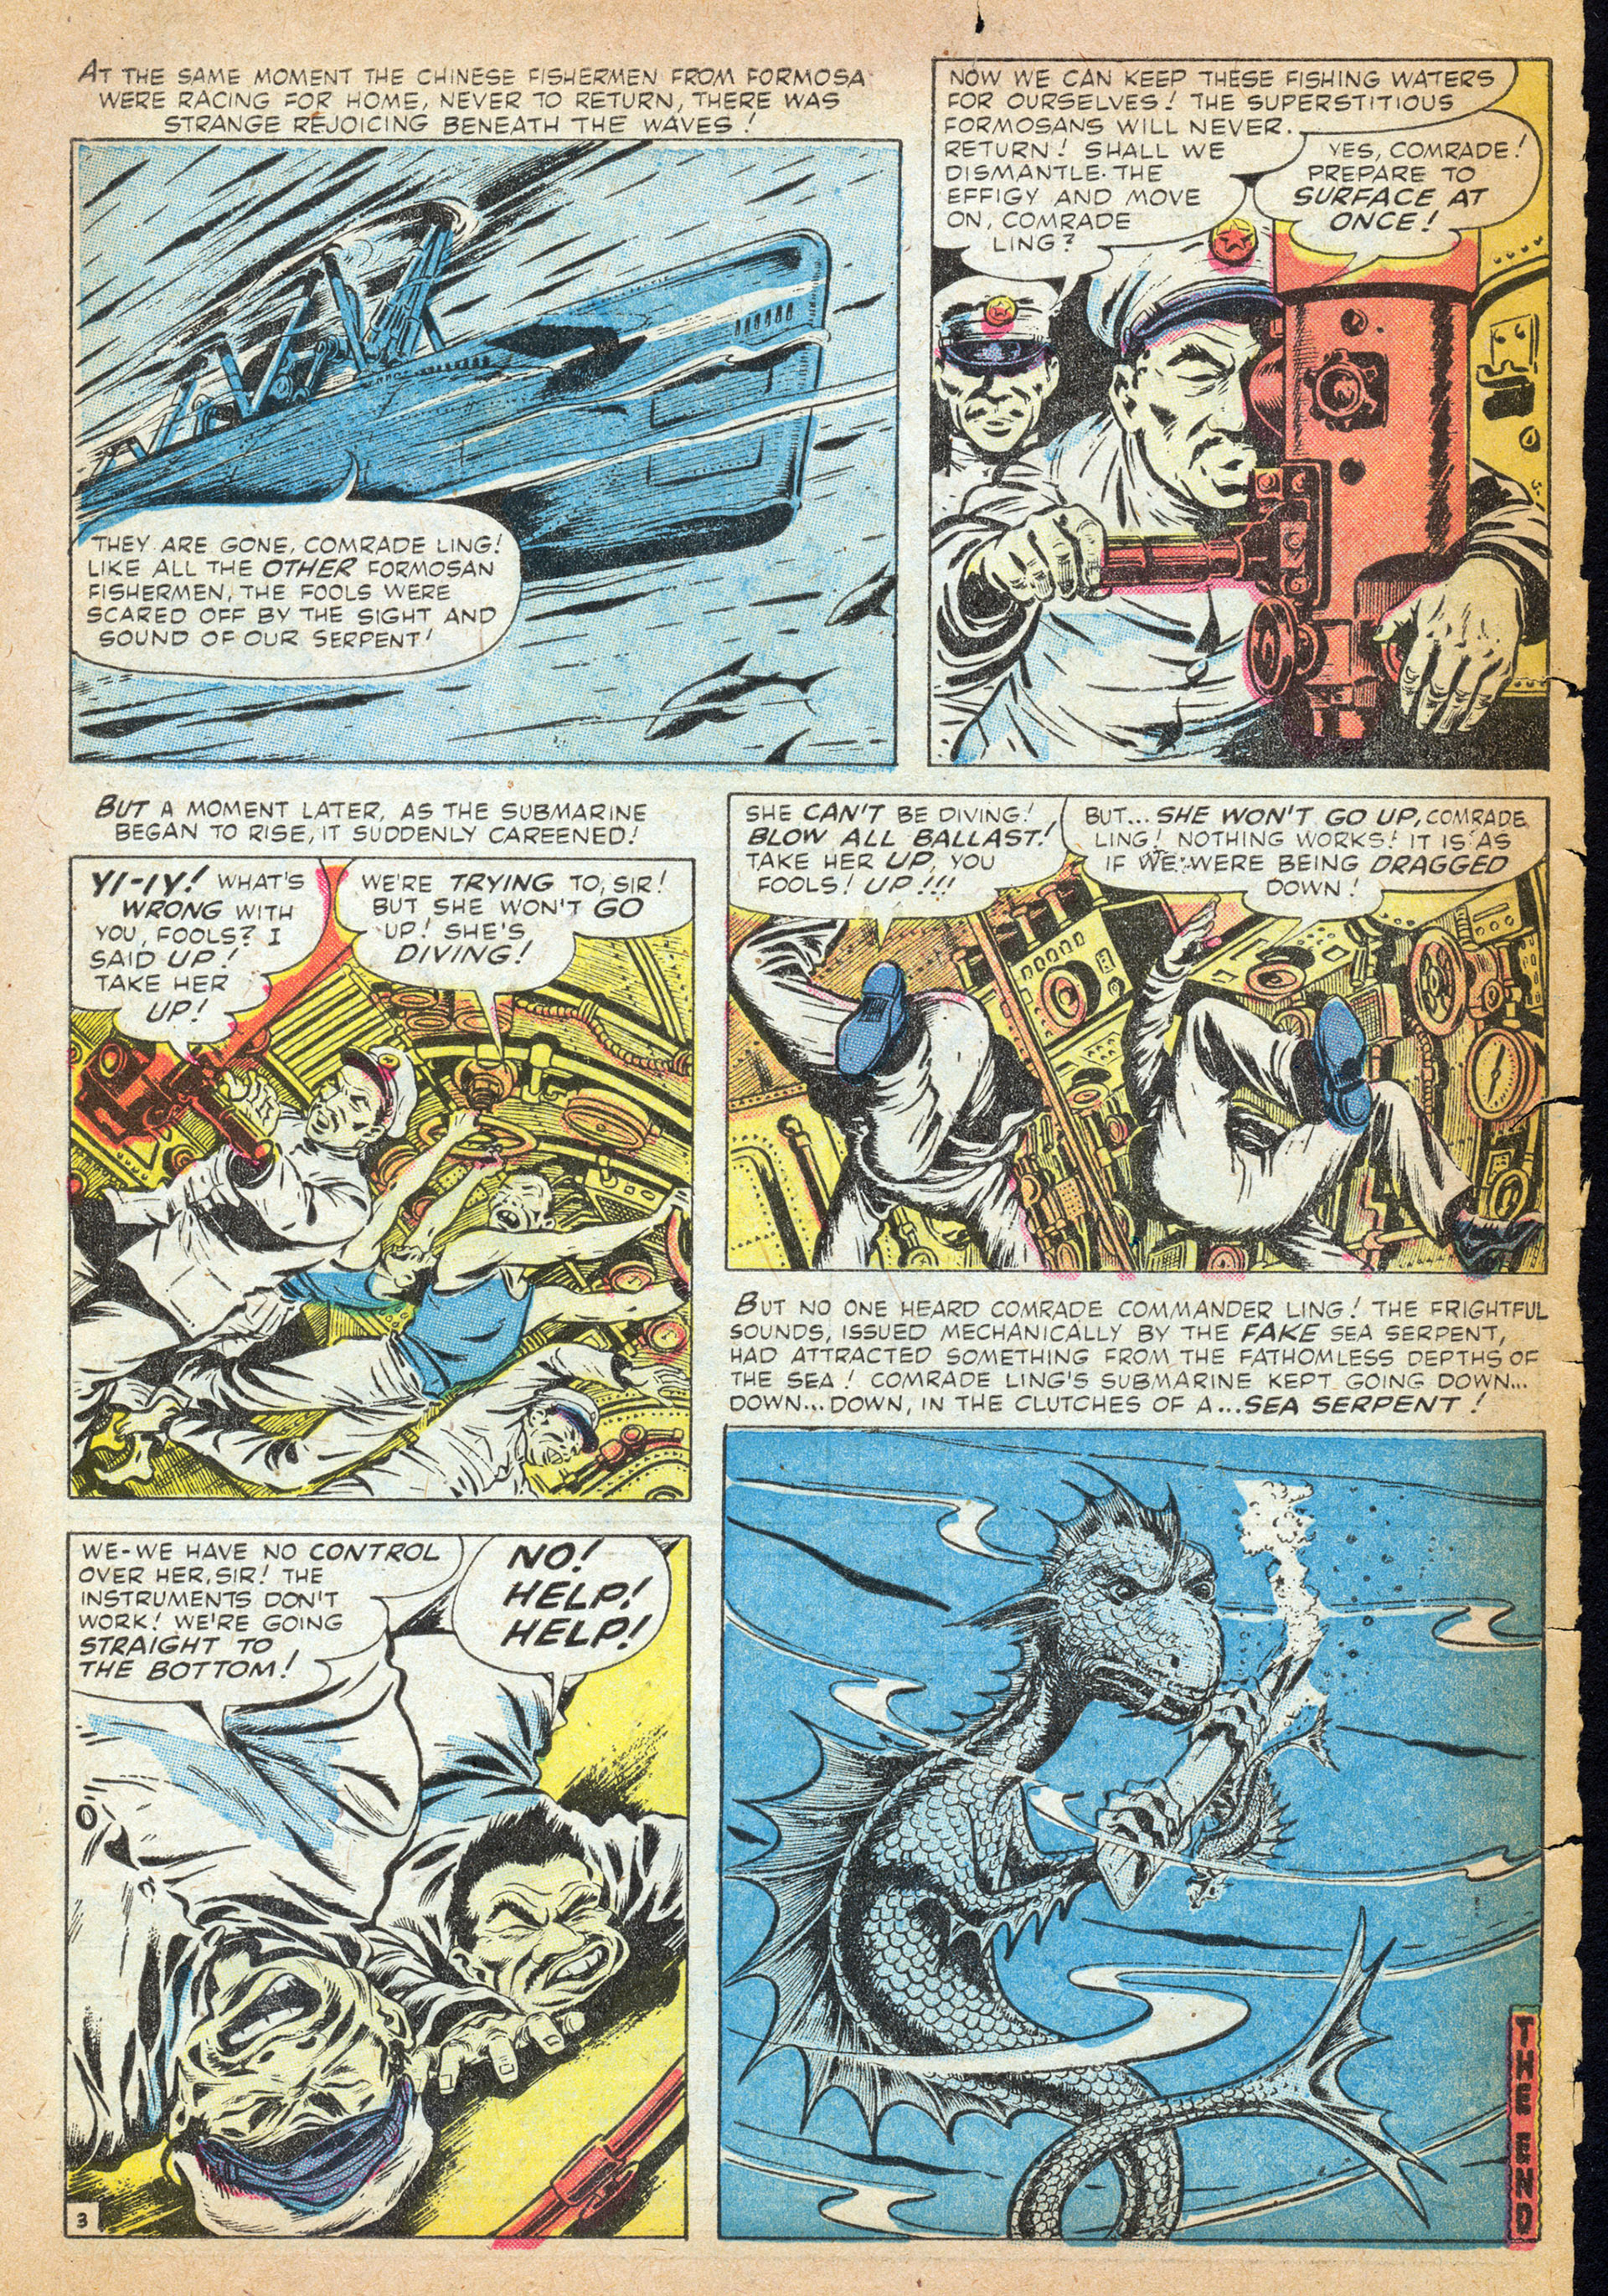 Marvel Tales (1949) 153 Page 25